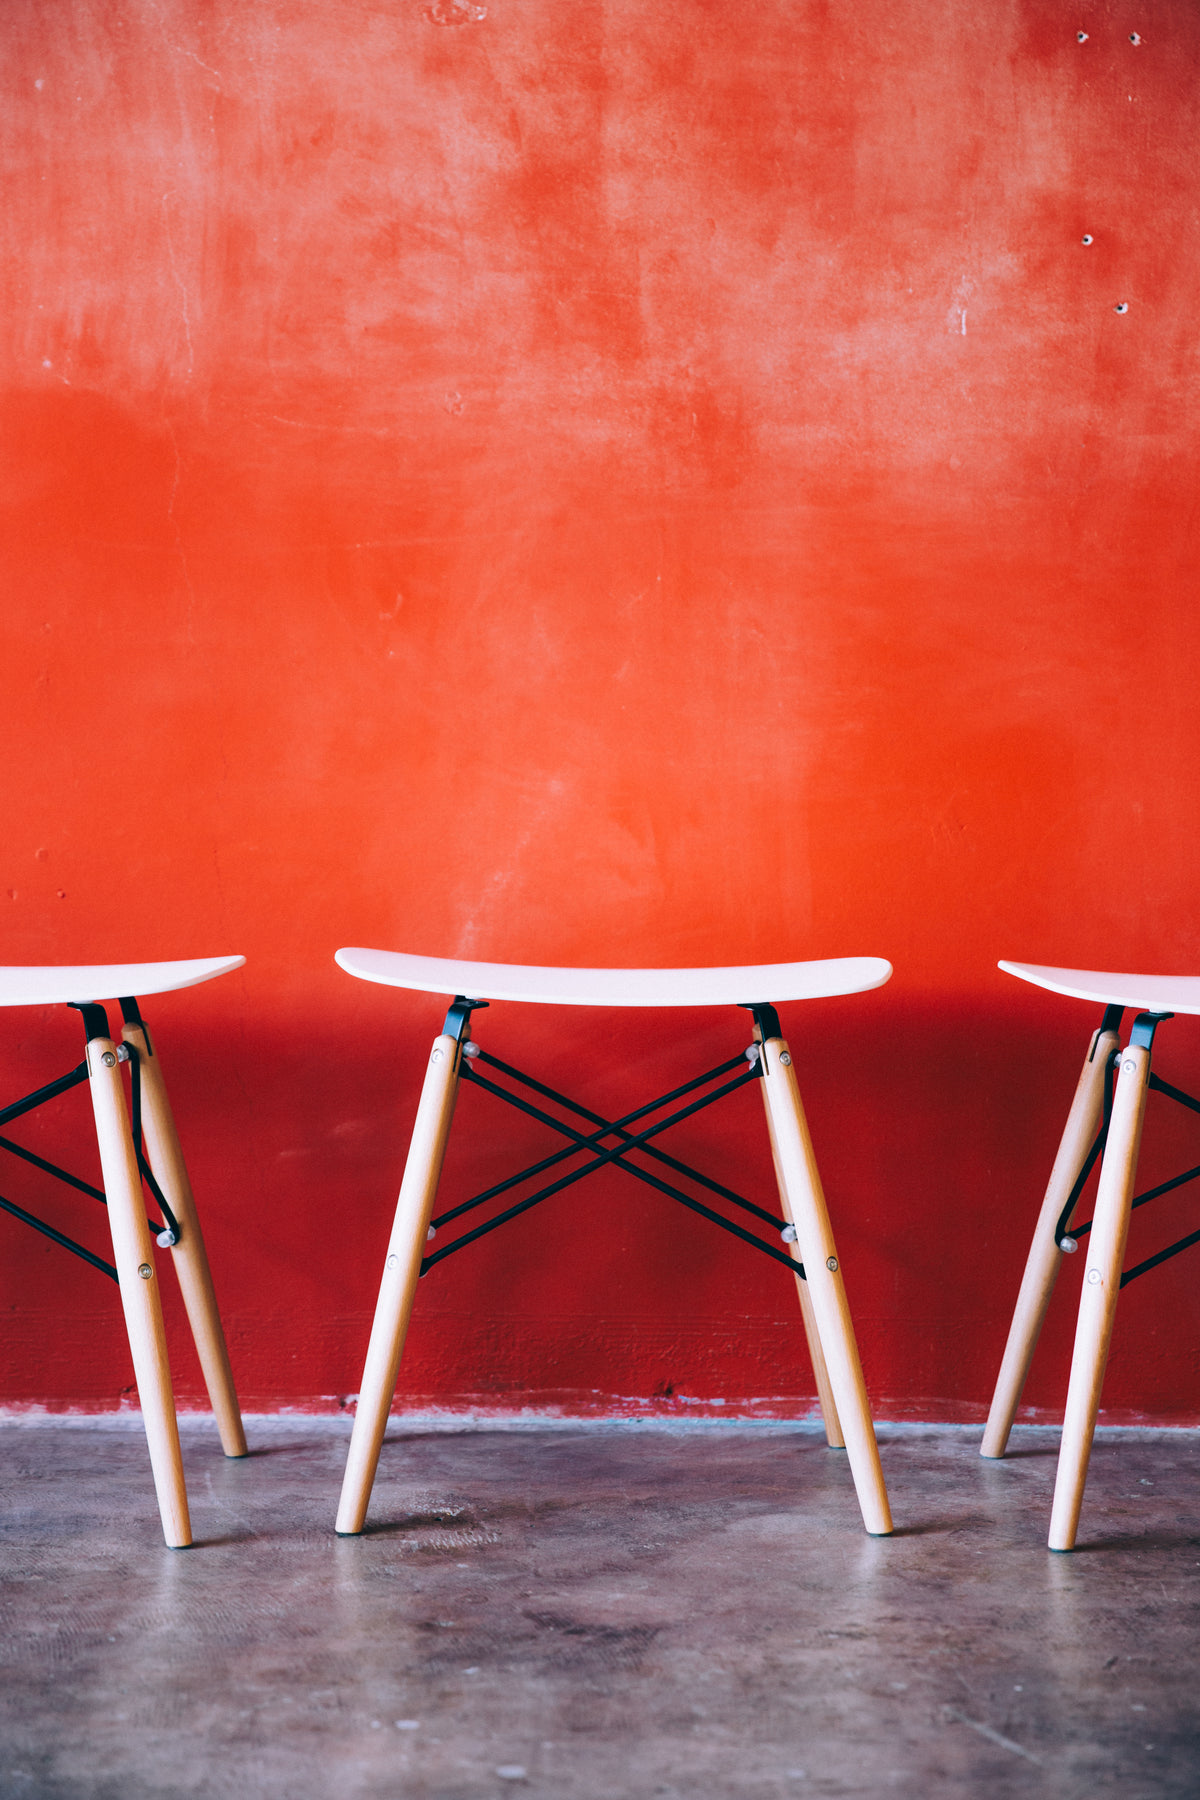 modern stools by red wall